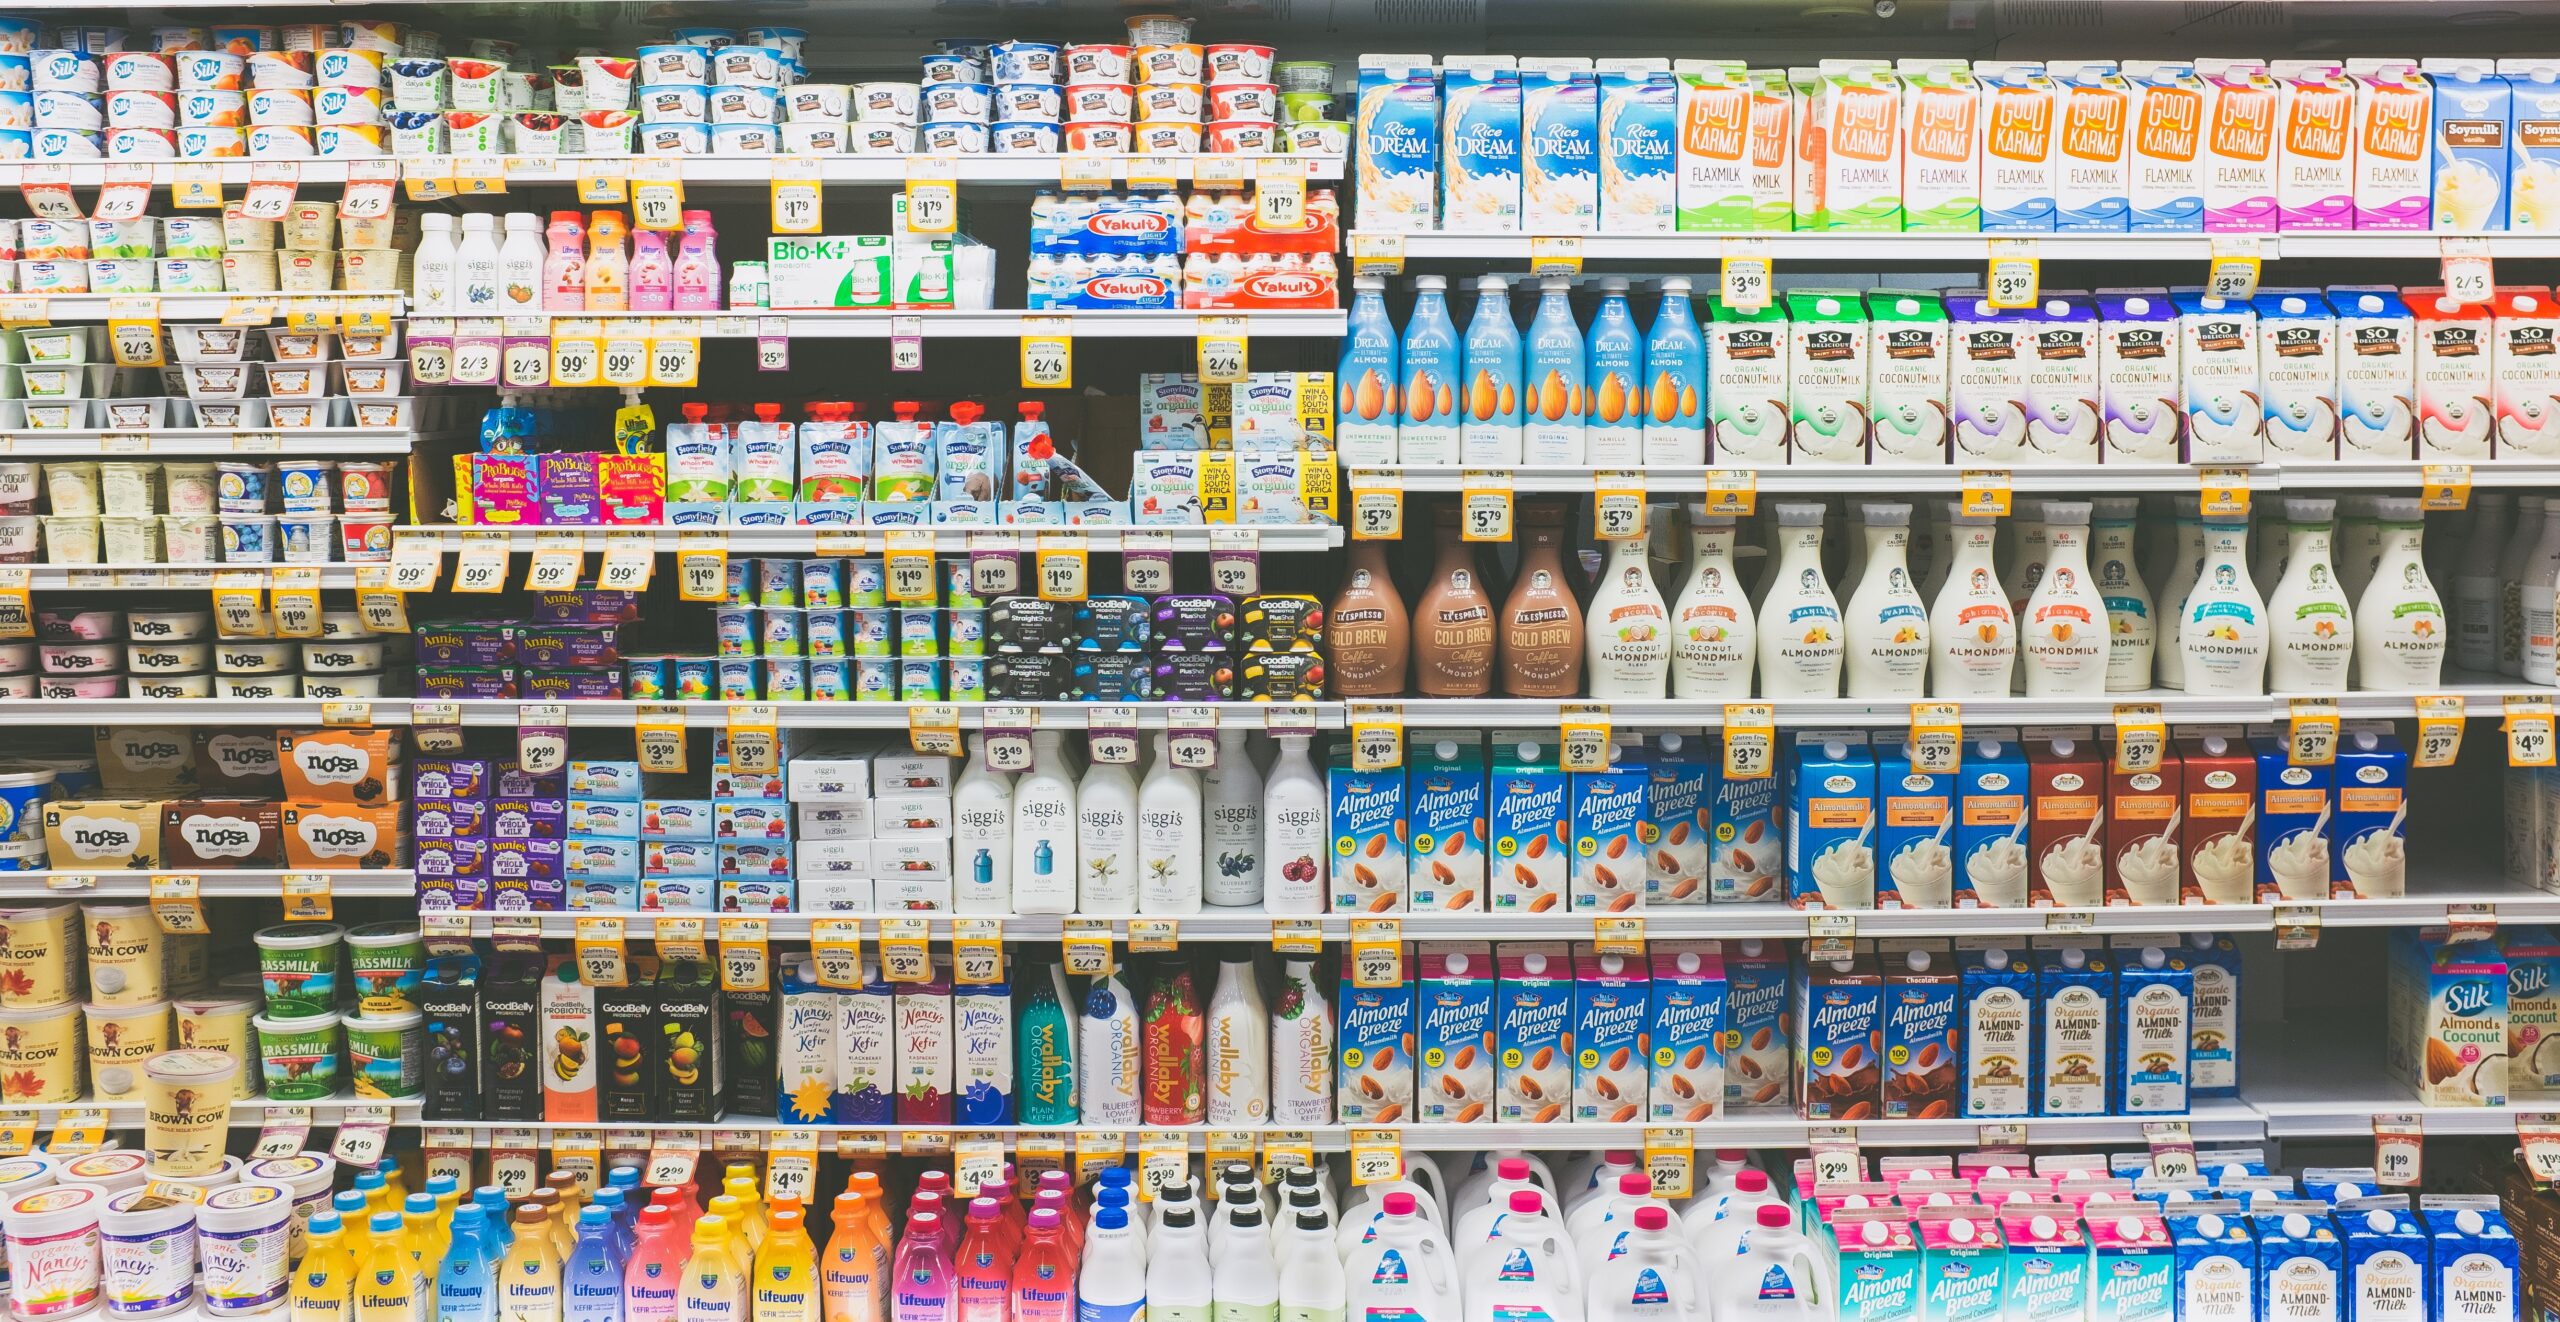 Best practices for gathering consumer insights in the CPG industry